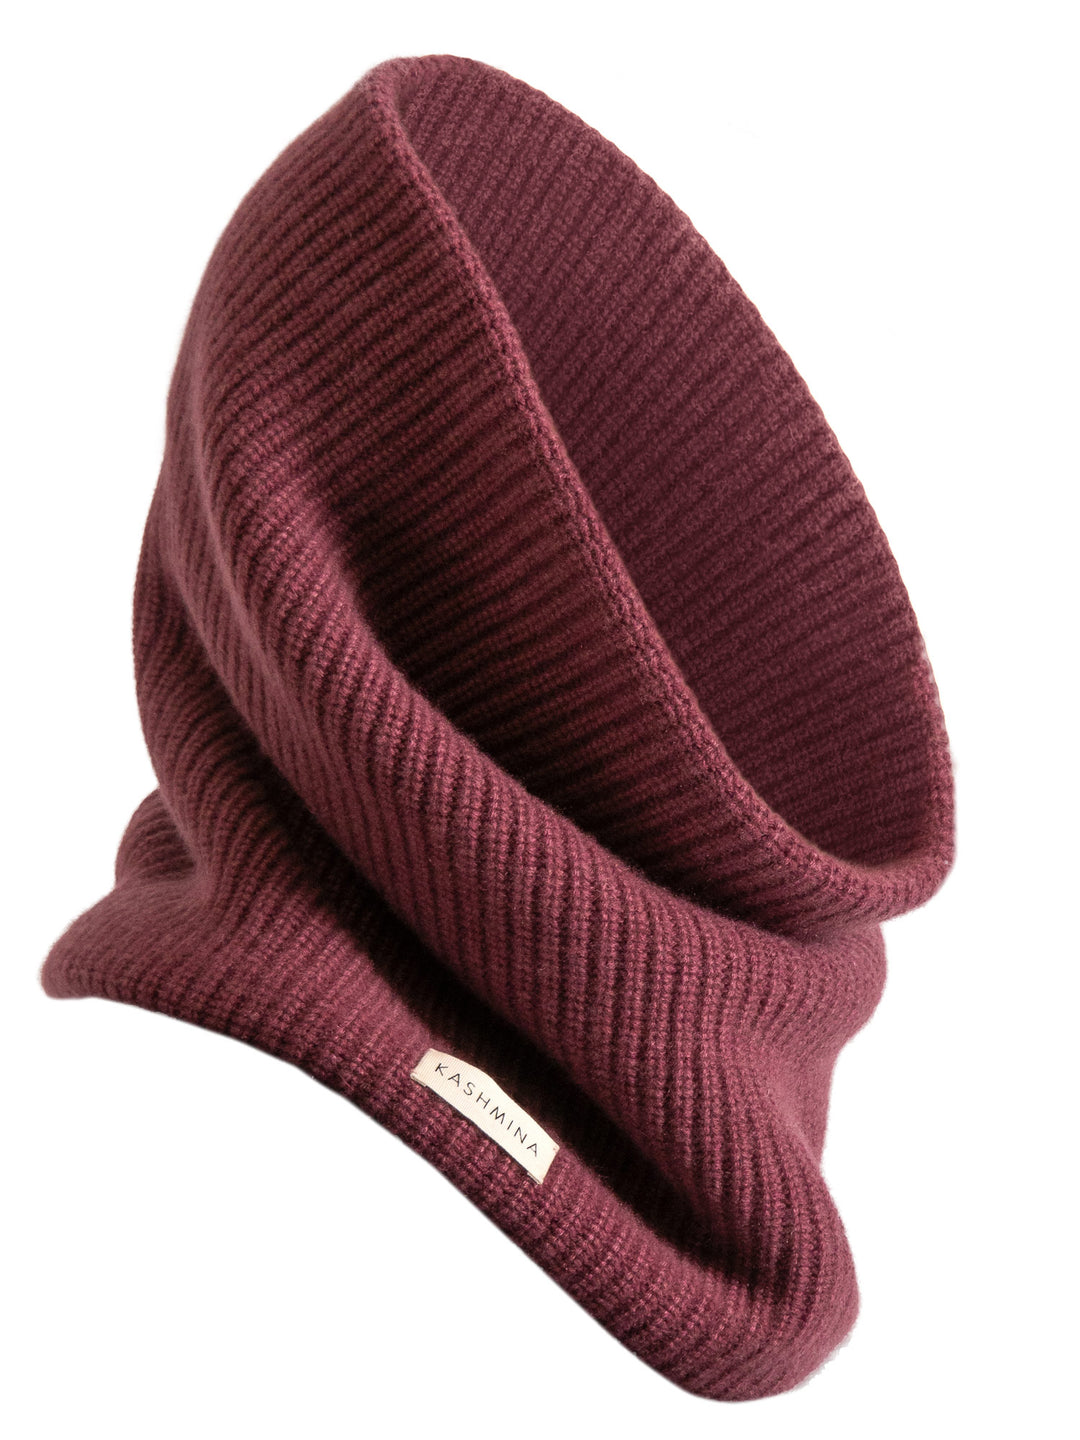  Rib knitted cashmere snood / scarf "Erika" in 100% pure cashmere. Scandinavian design by Kashmina. Color: Wild Plum.